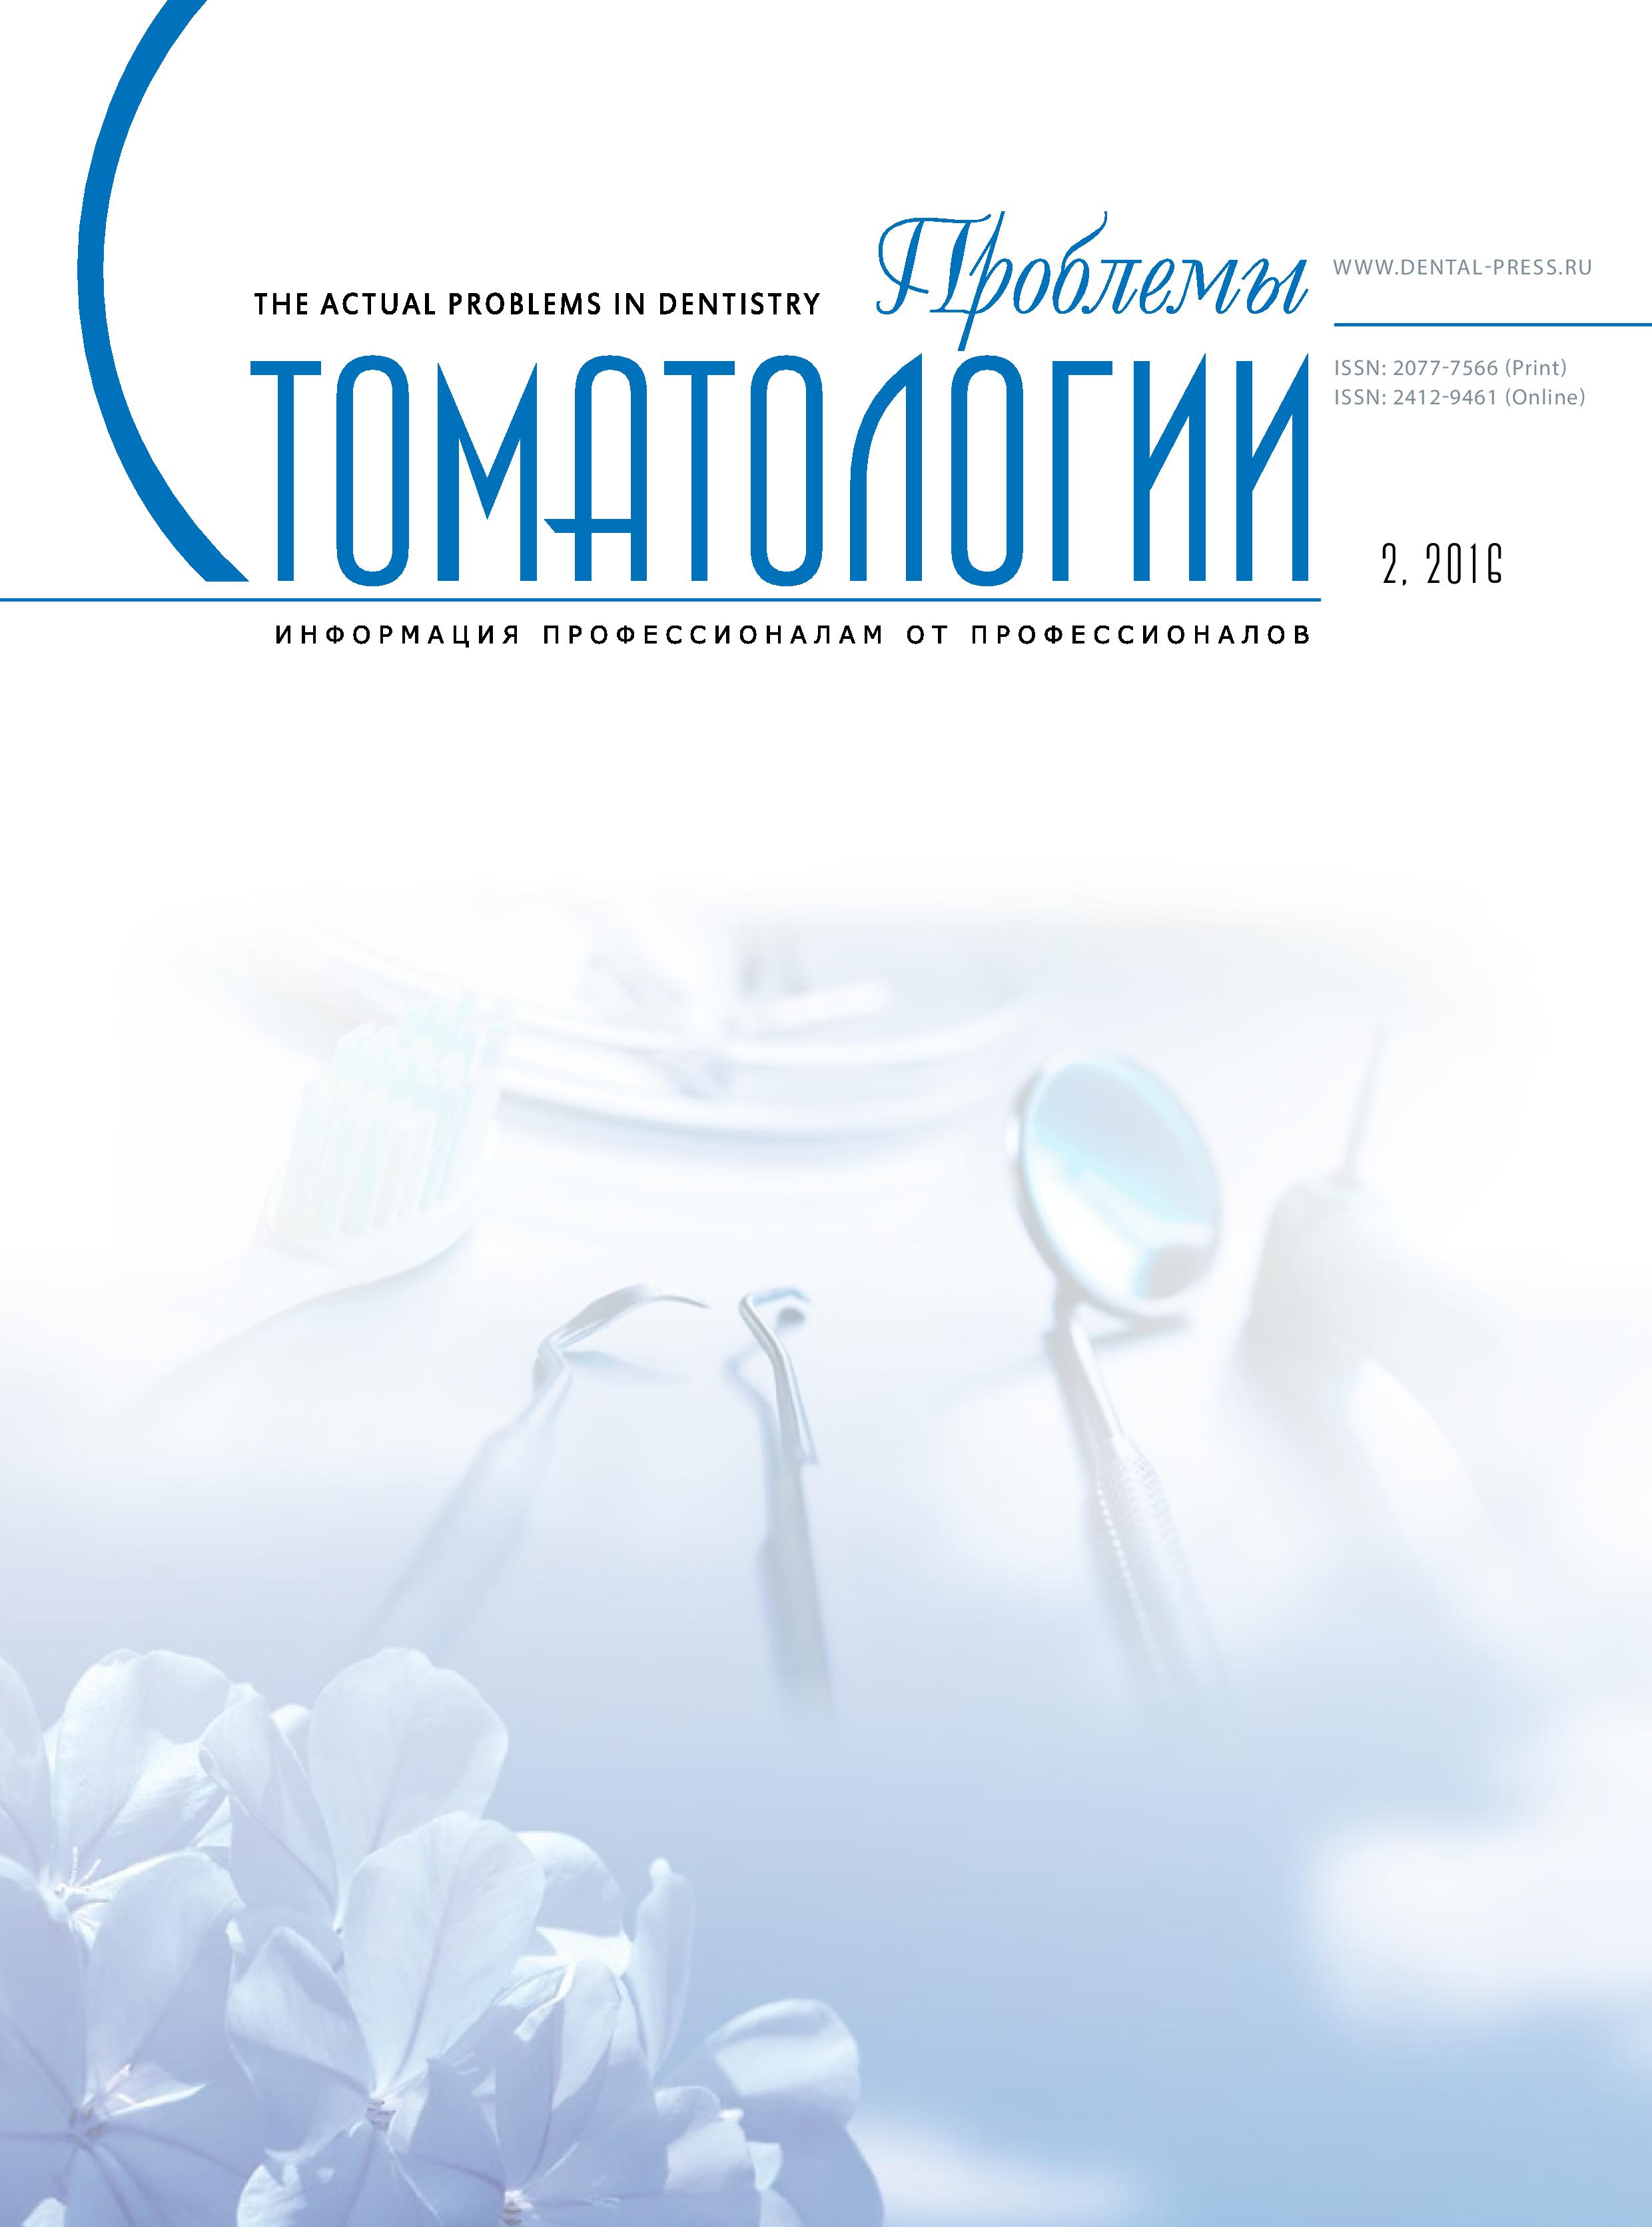                         The usage of oral irrigator by pregnant women with the early stages of periodontal diseases
            